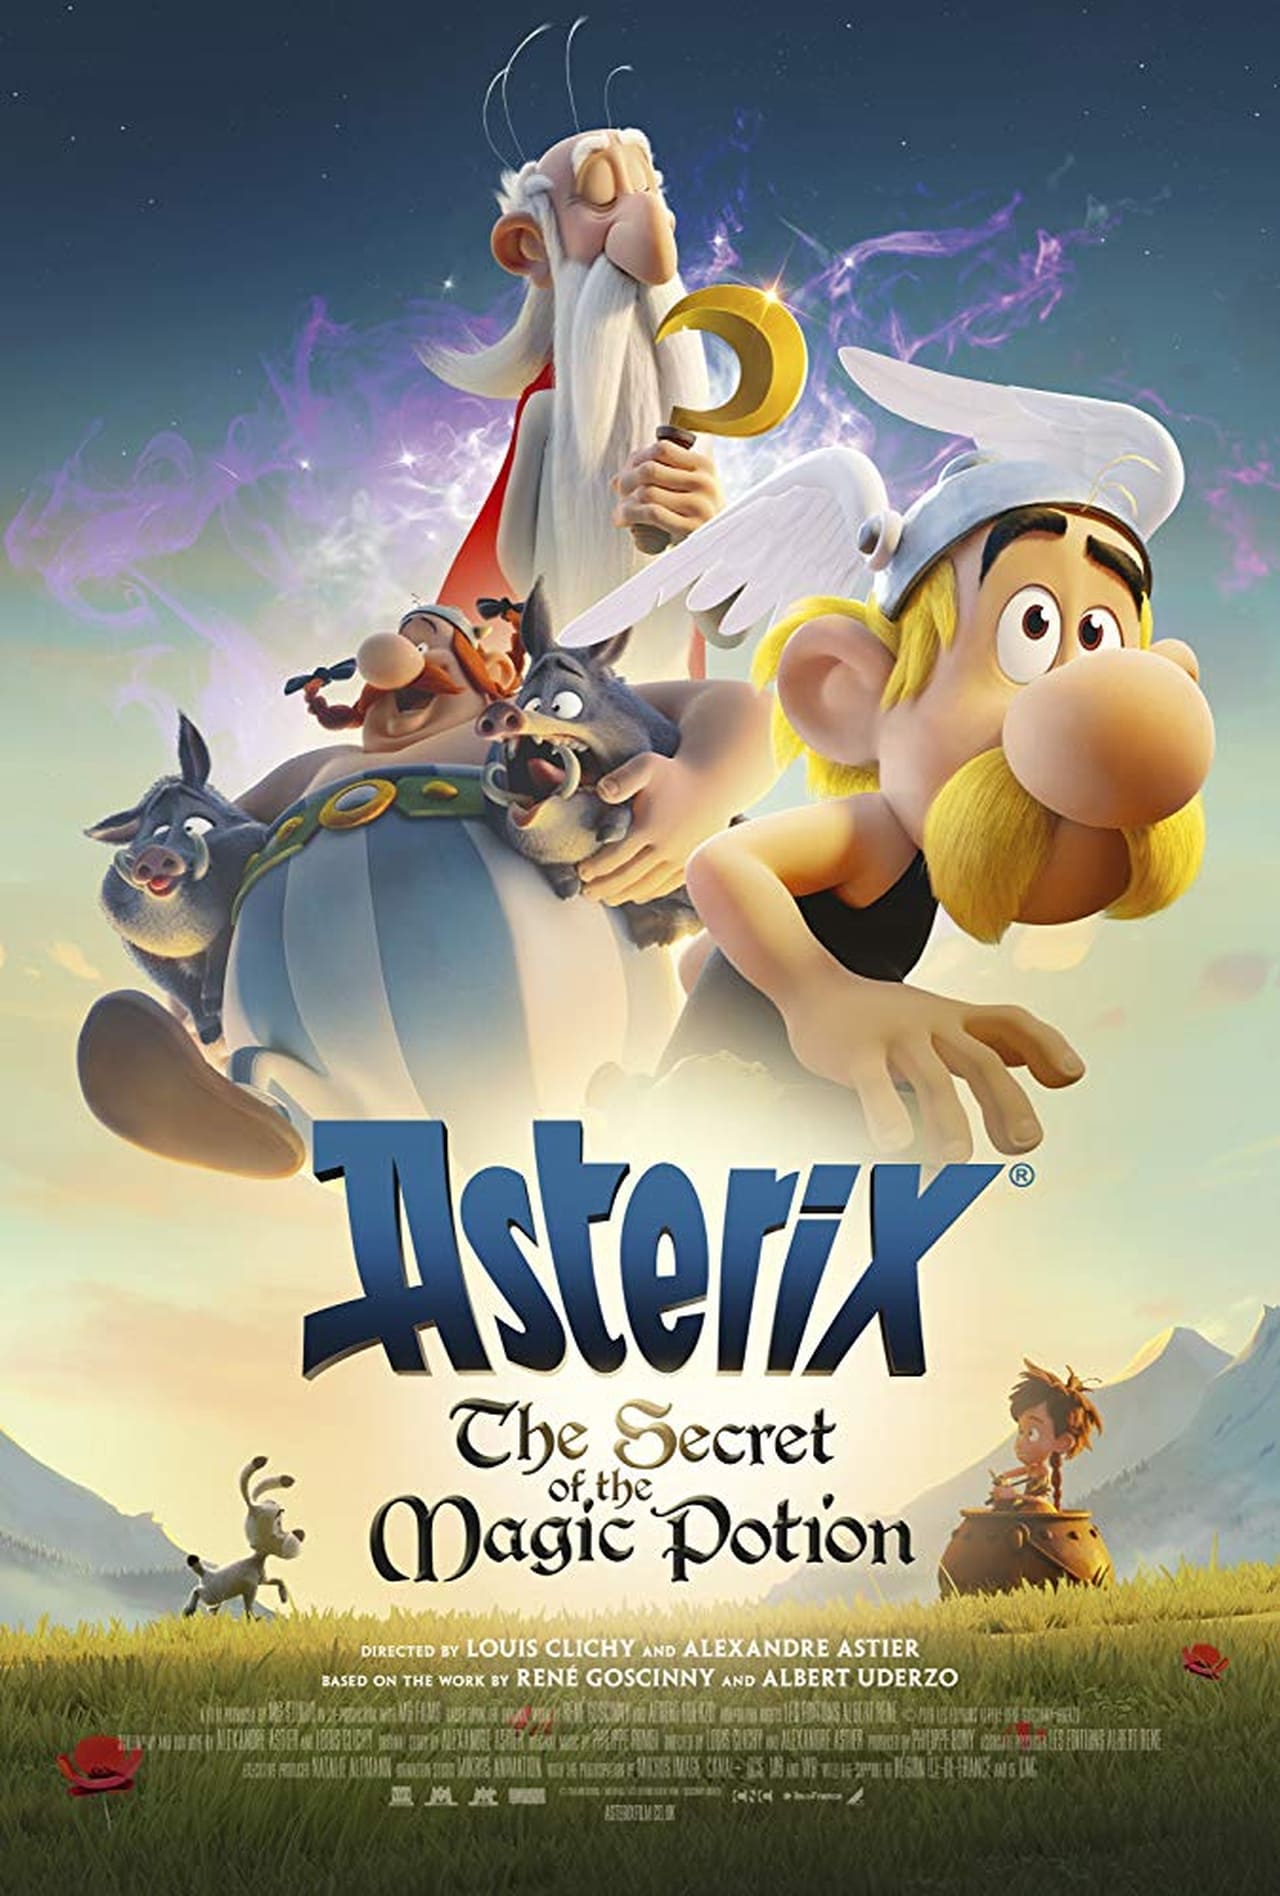 EN - 13-Asterix The Secret Of The Magic Potion (2019) - Asterix Collection